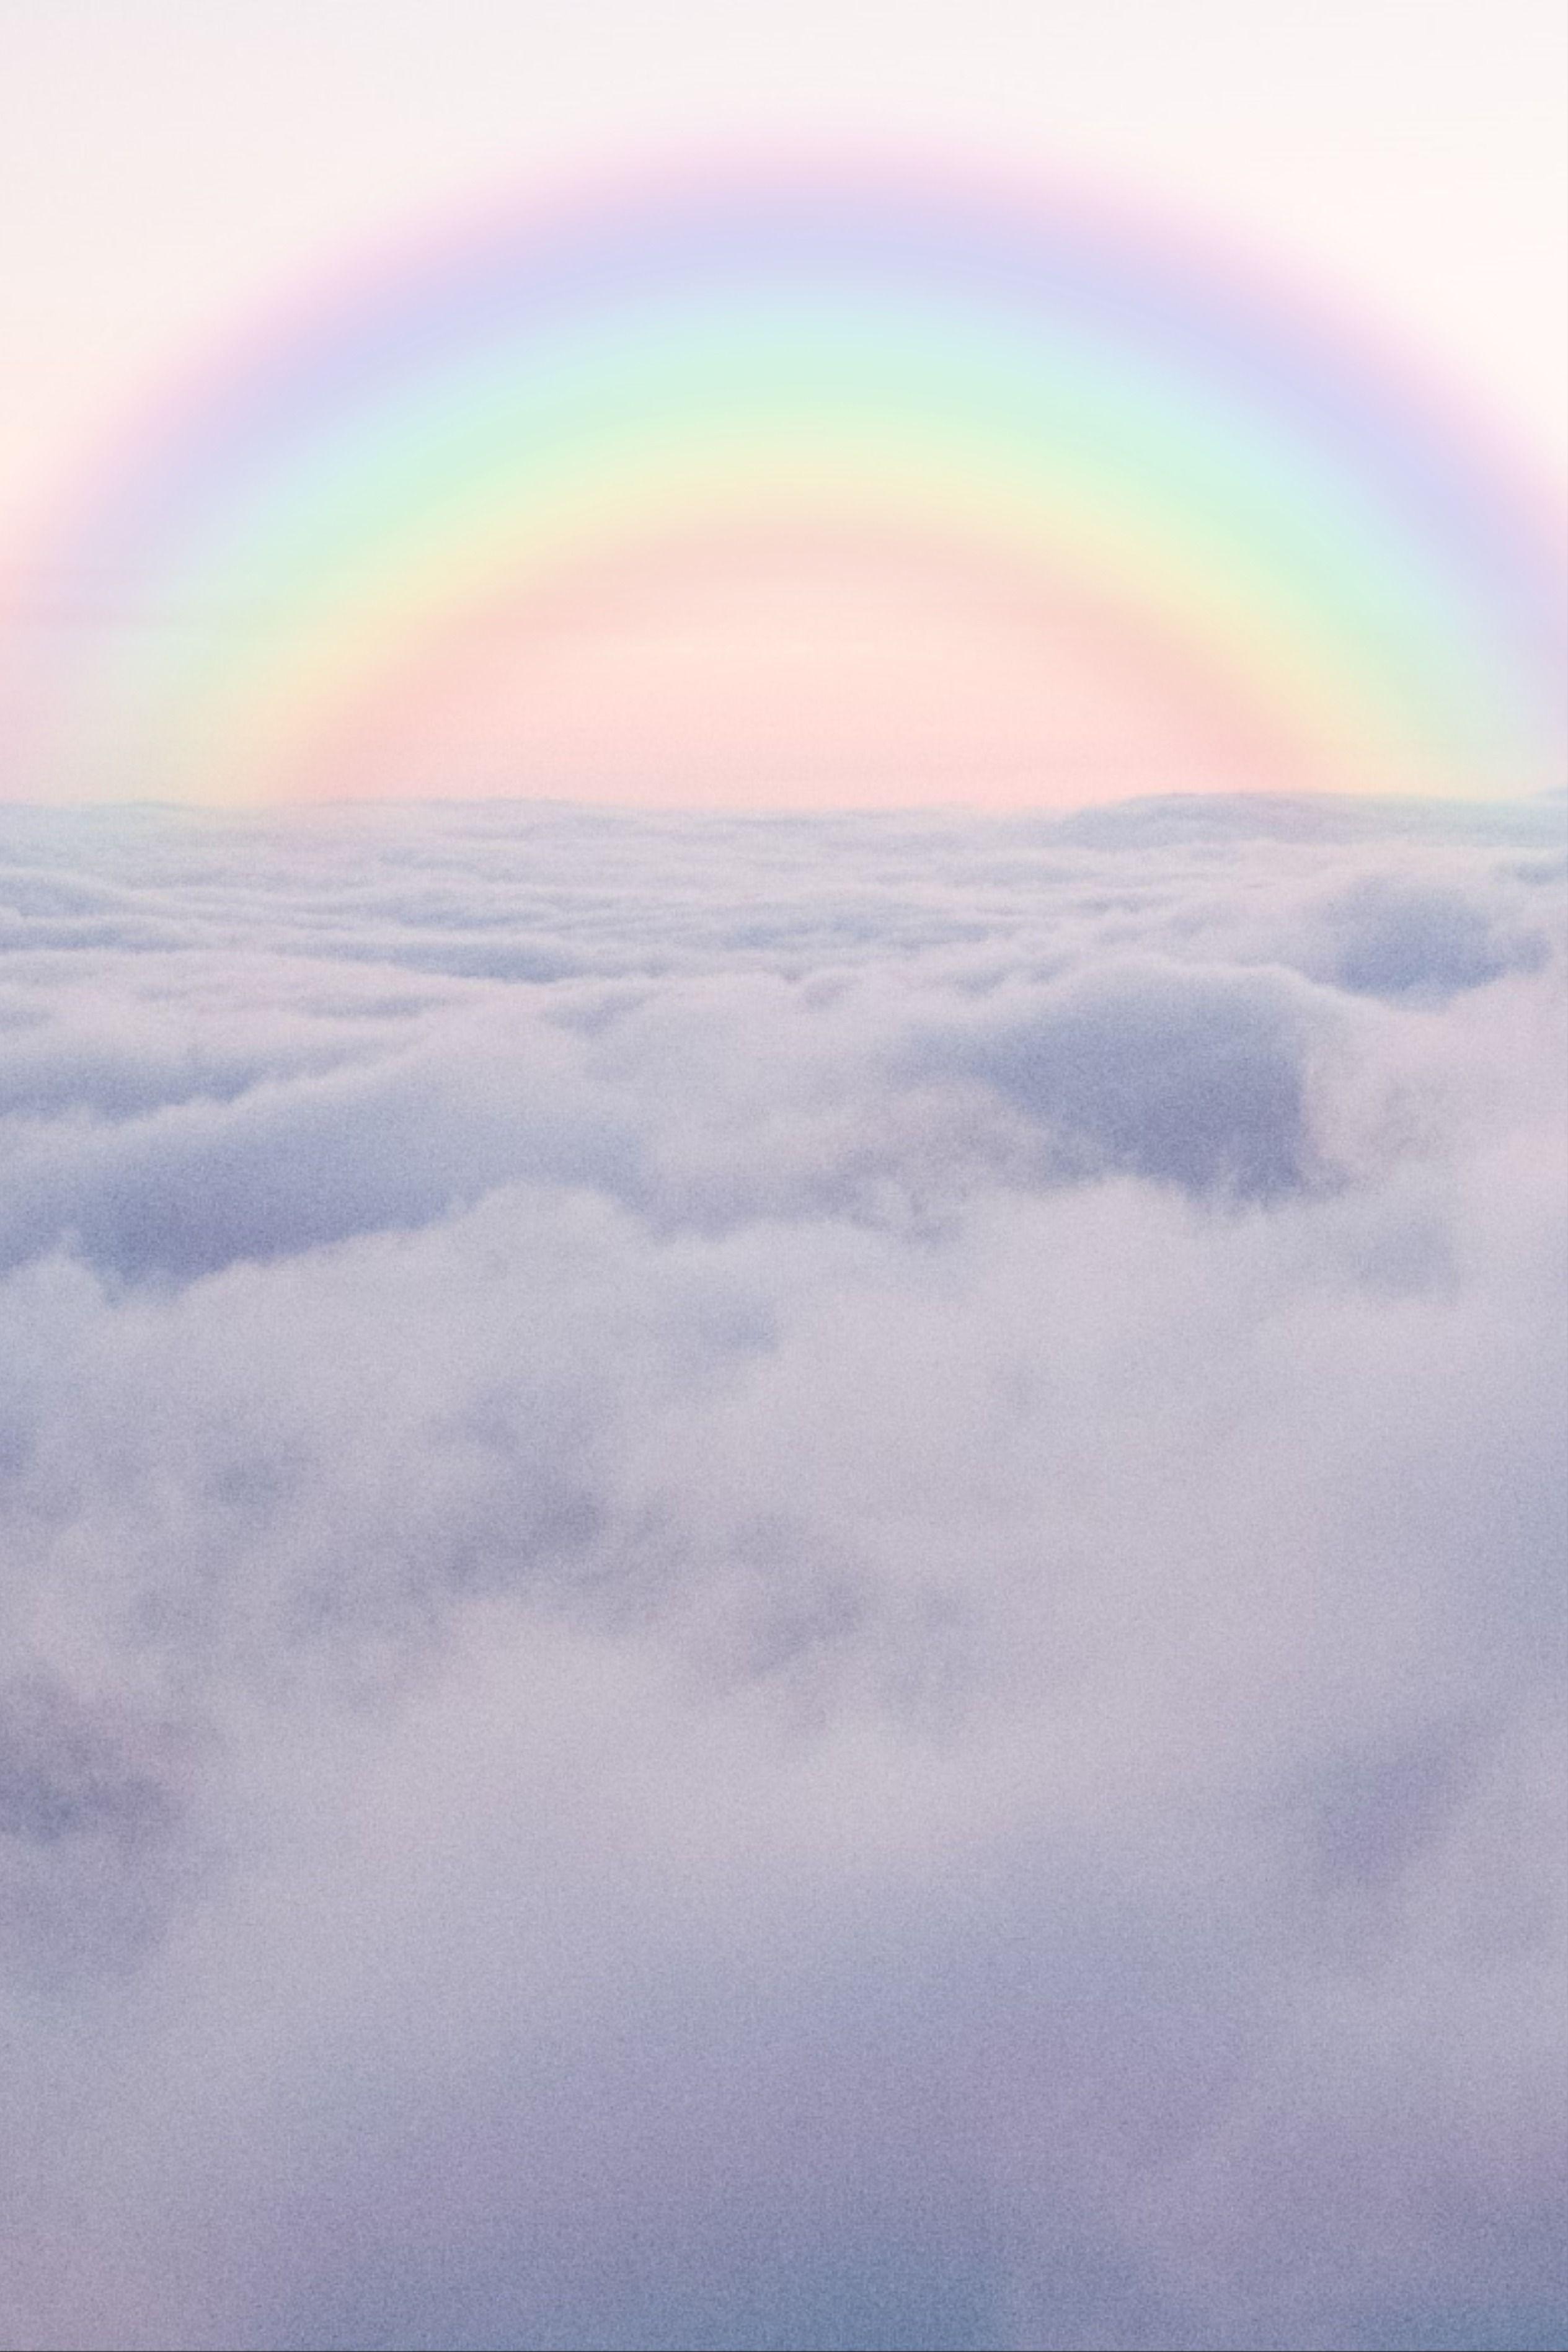 Aesthetic Rainbow Mobile Wallpapers - Top Free Aesthetic Rainbow Mobile